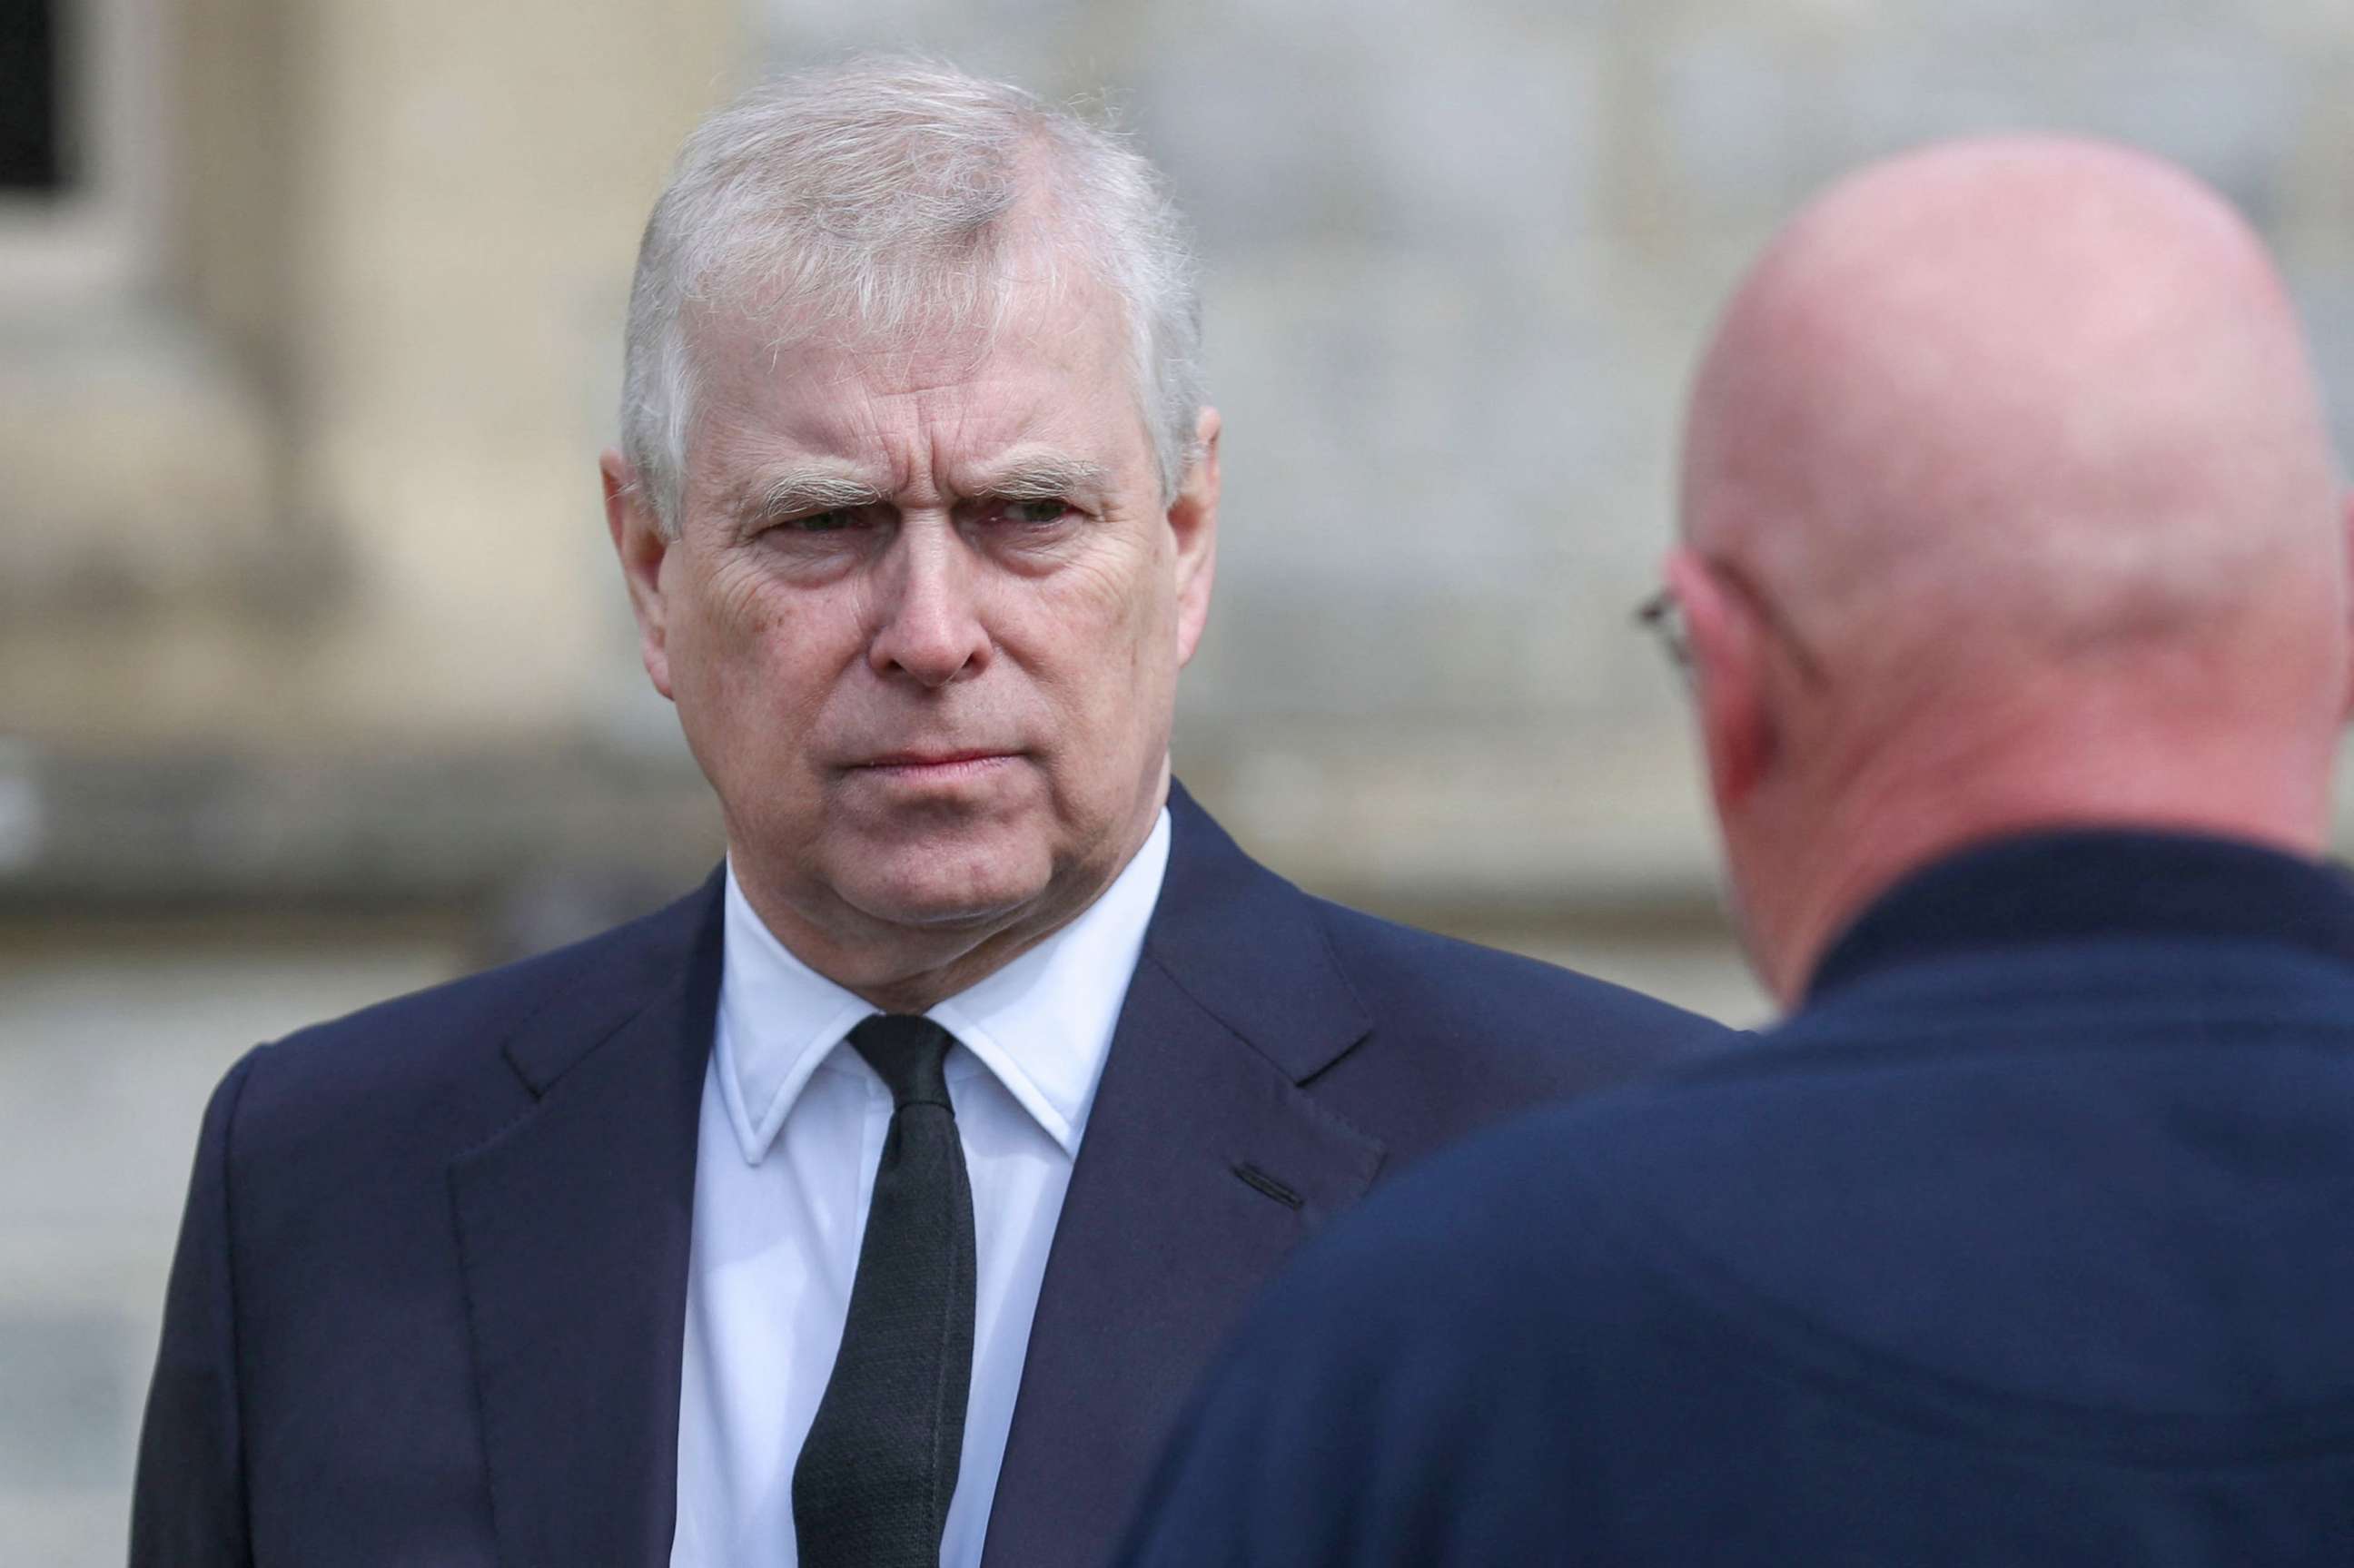 PHOTO: Prince Andrew, Duke of York attends the Sunday service at the Royal Chapel of All Saints in Windsor, England, April 11, 2021.